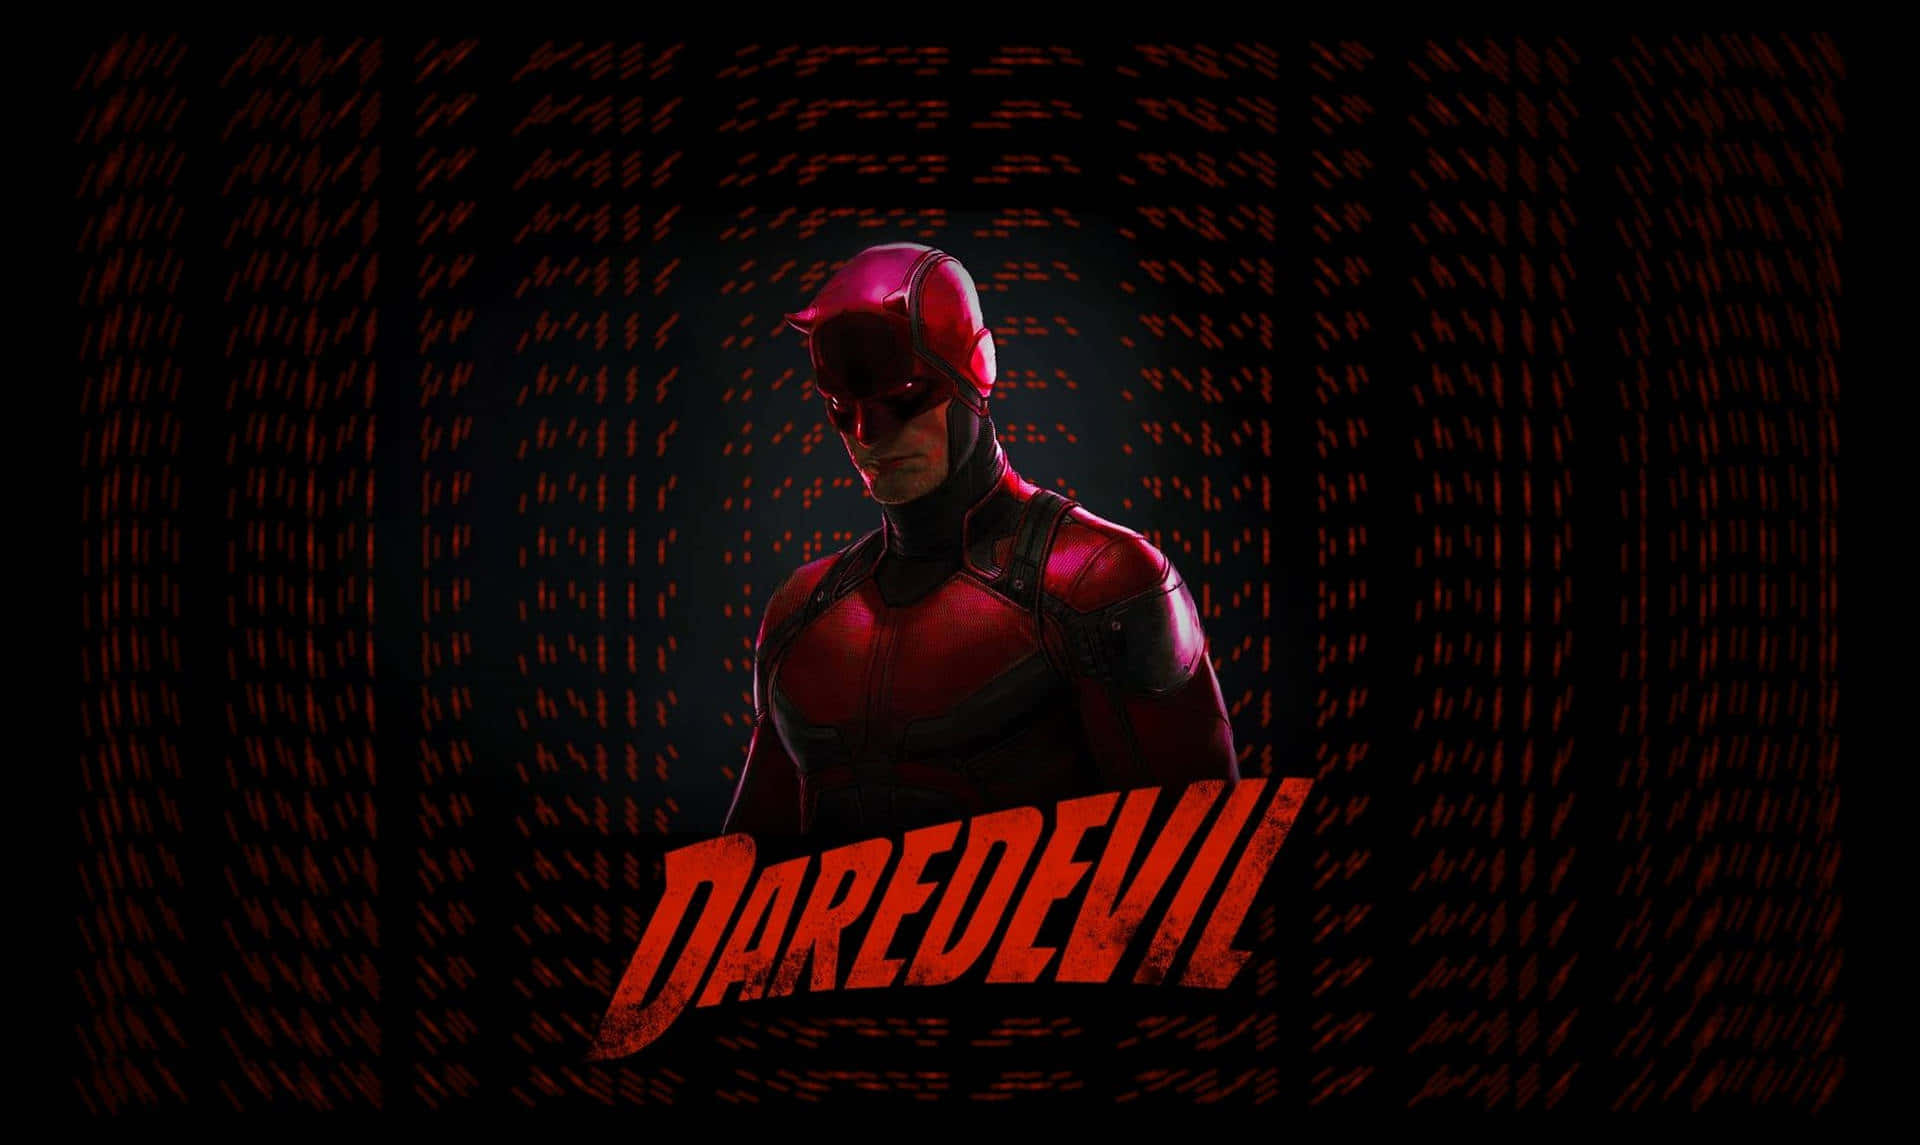 Blind lawyer and superhero, Matt Murdock fights crime and injustice as Daredevil